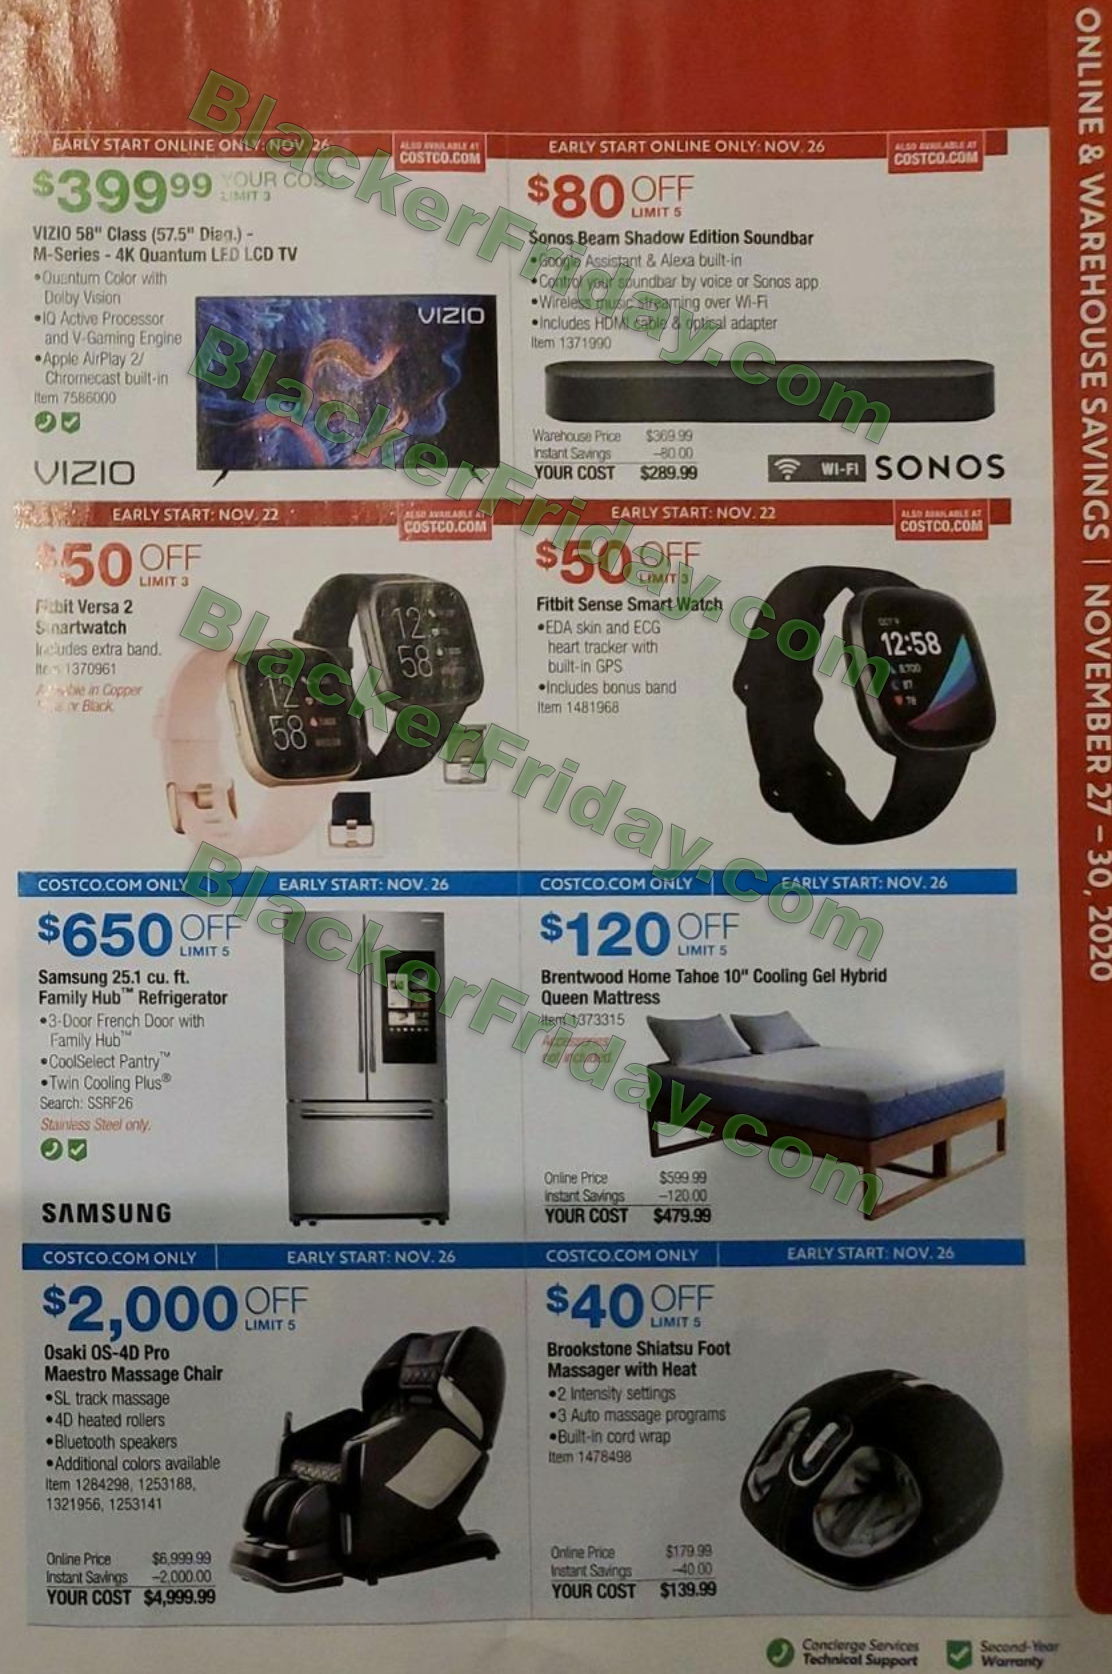 Costco Cyber Monday 2020 Sale - What to Expect - Blacker Friday